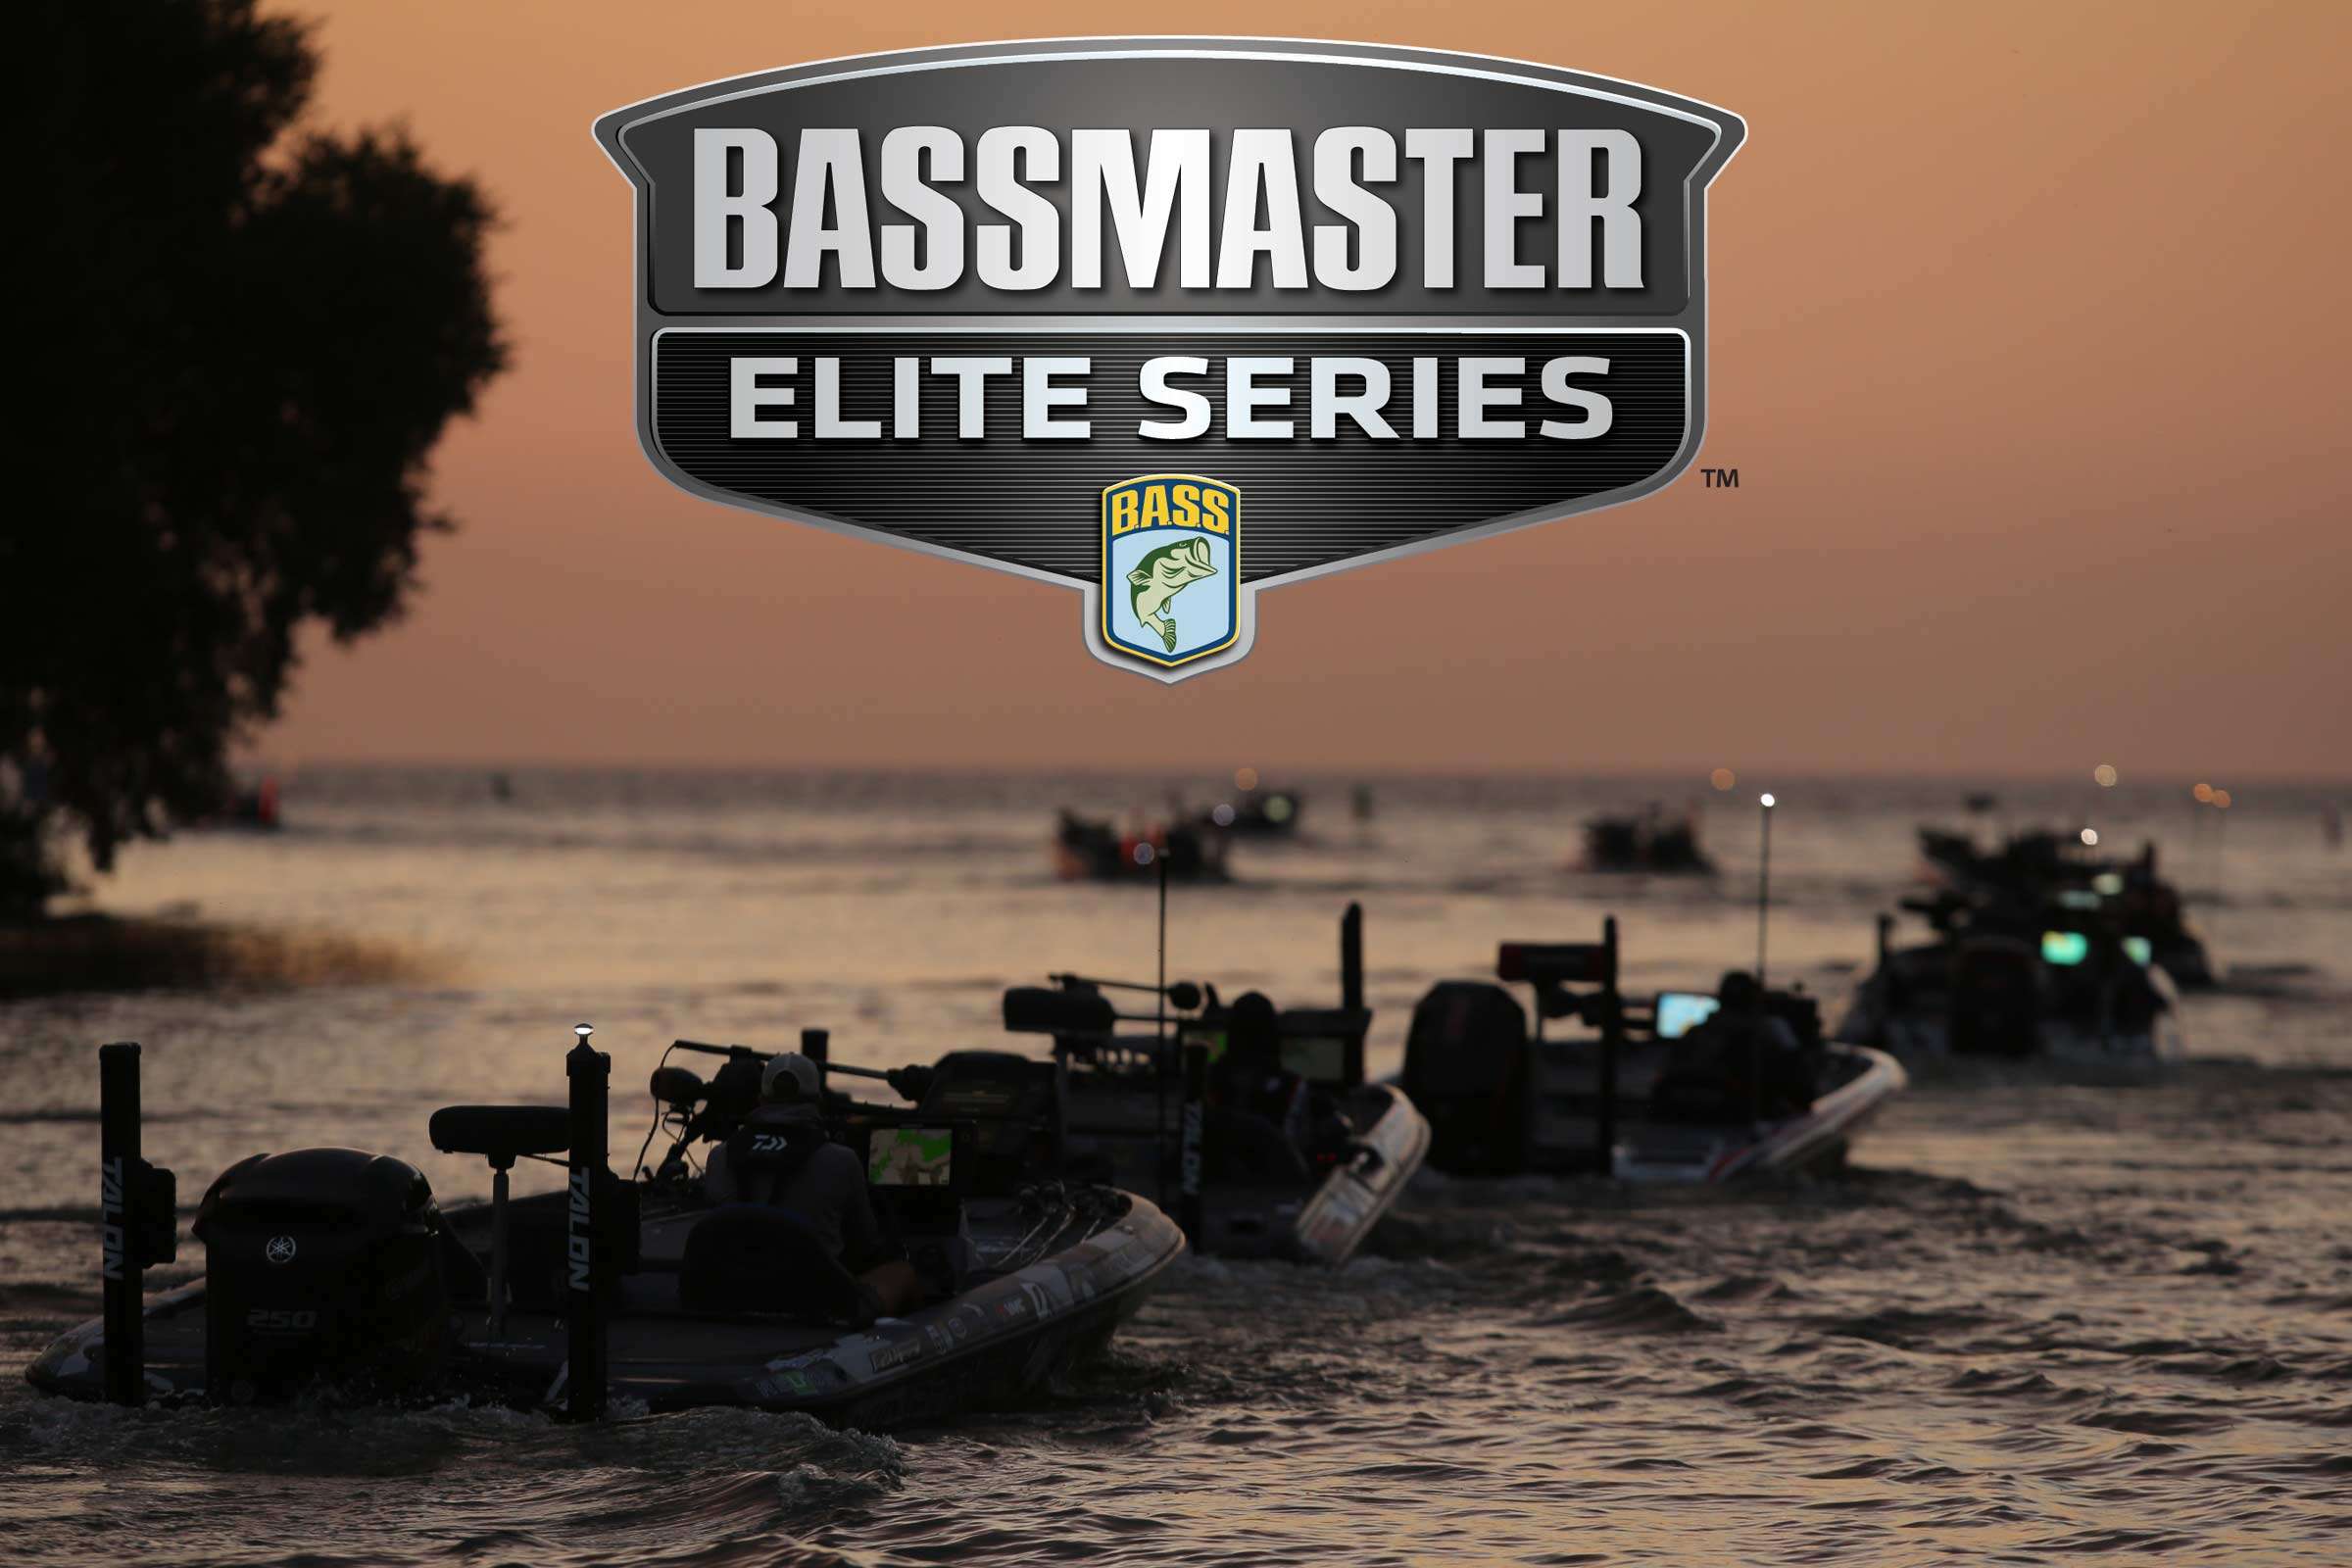 After the shortest break ever, the Bassmaster Elite Series kicks off its 2021 schedule in February with an increased field of 101 anglers and Bassmaster LIVE airing on FOX Sports for every event. 